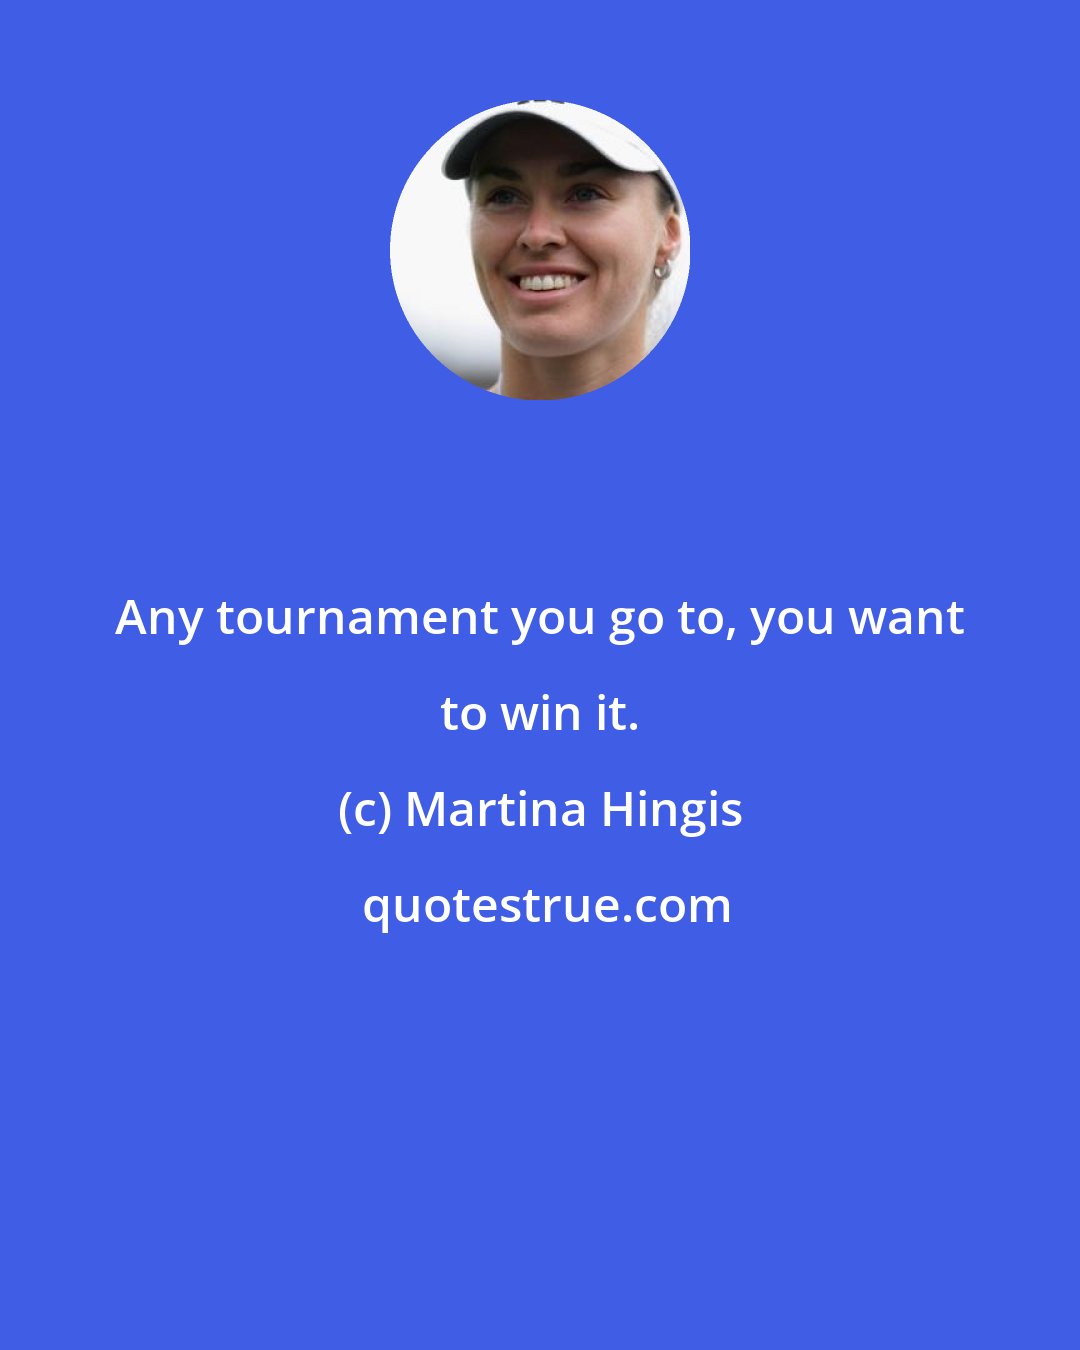 Martina Hingis: Any tournament you go to, you want to win it.